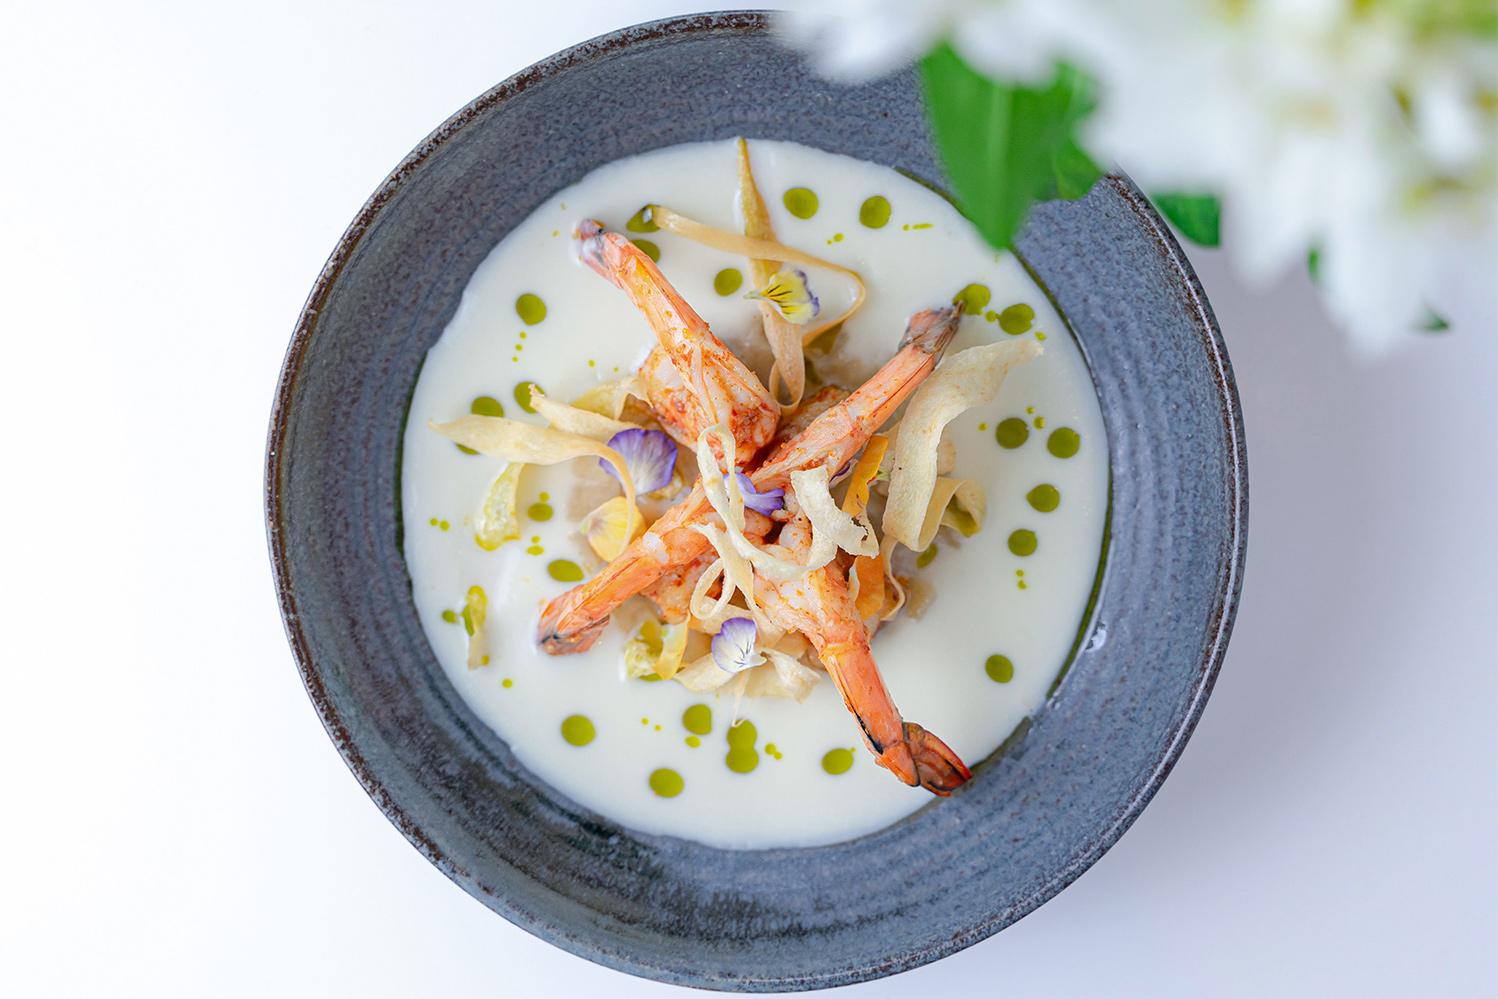 Gourmet presentation of apple and parsnip soup shown from above with shrimp and a purple flower garnish